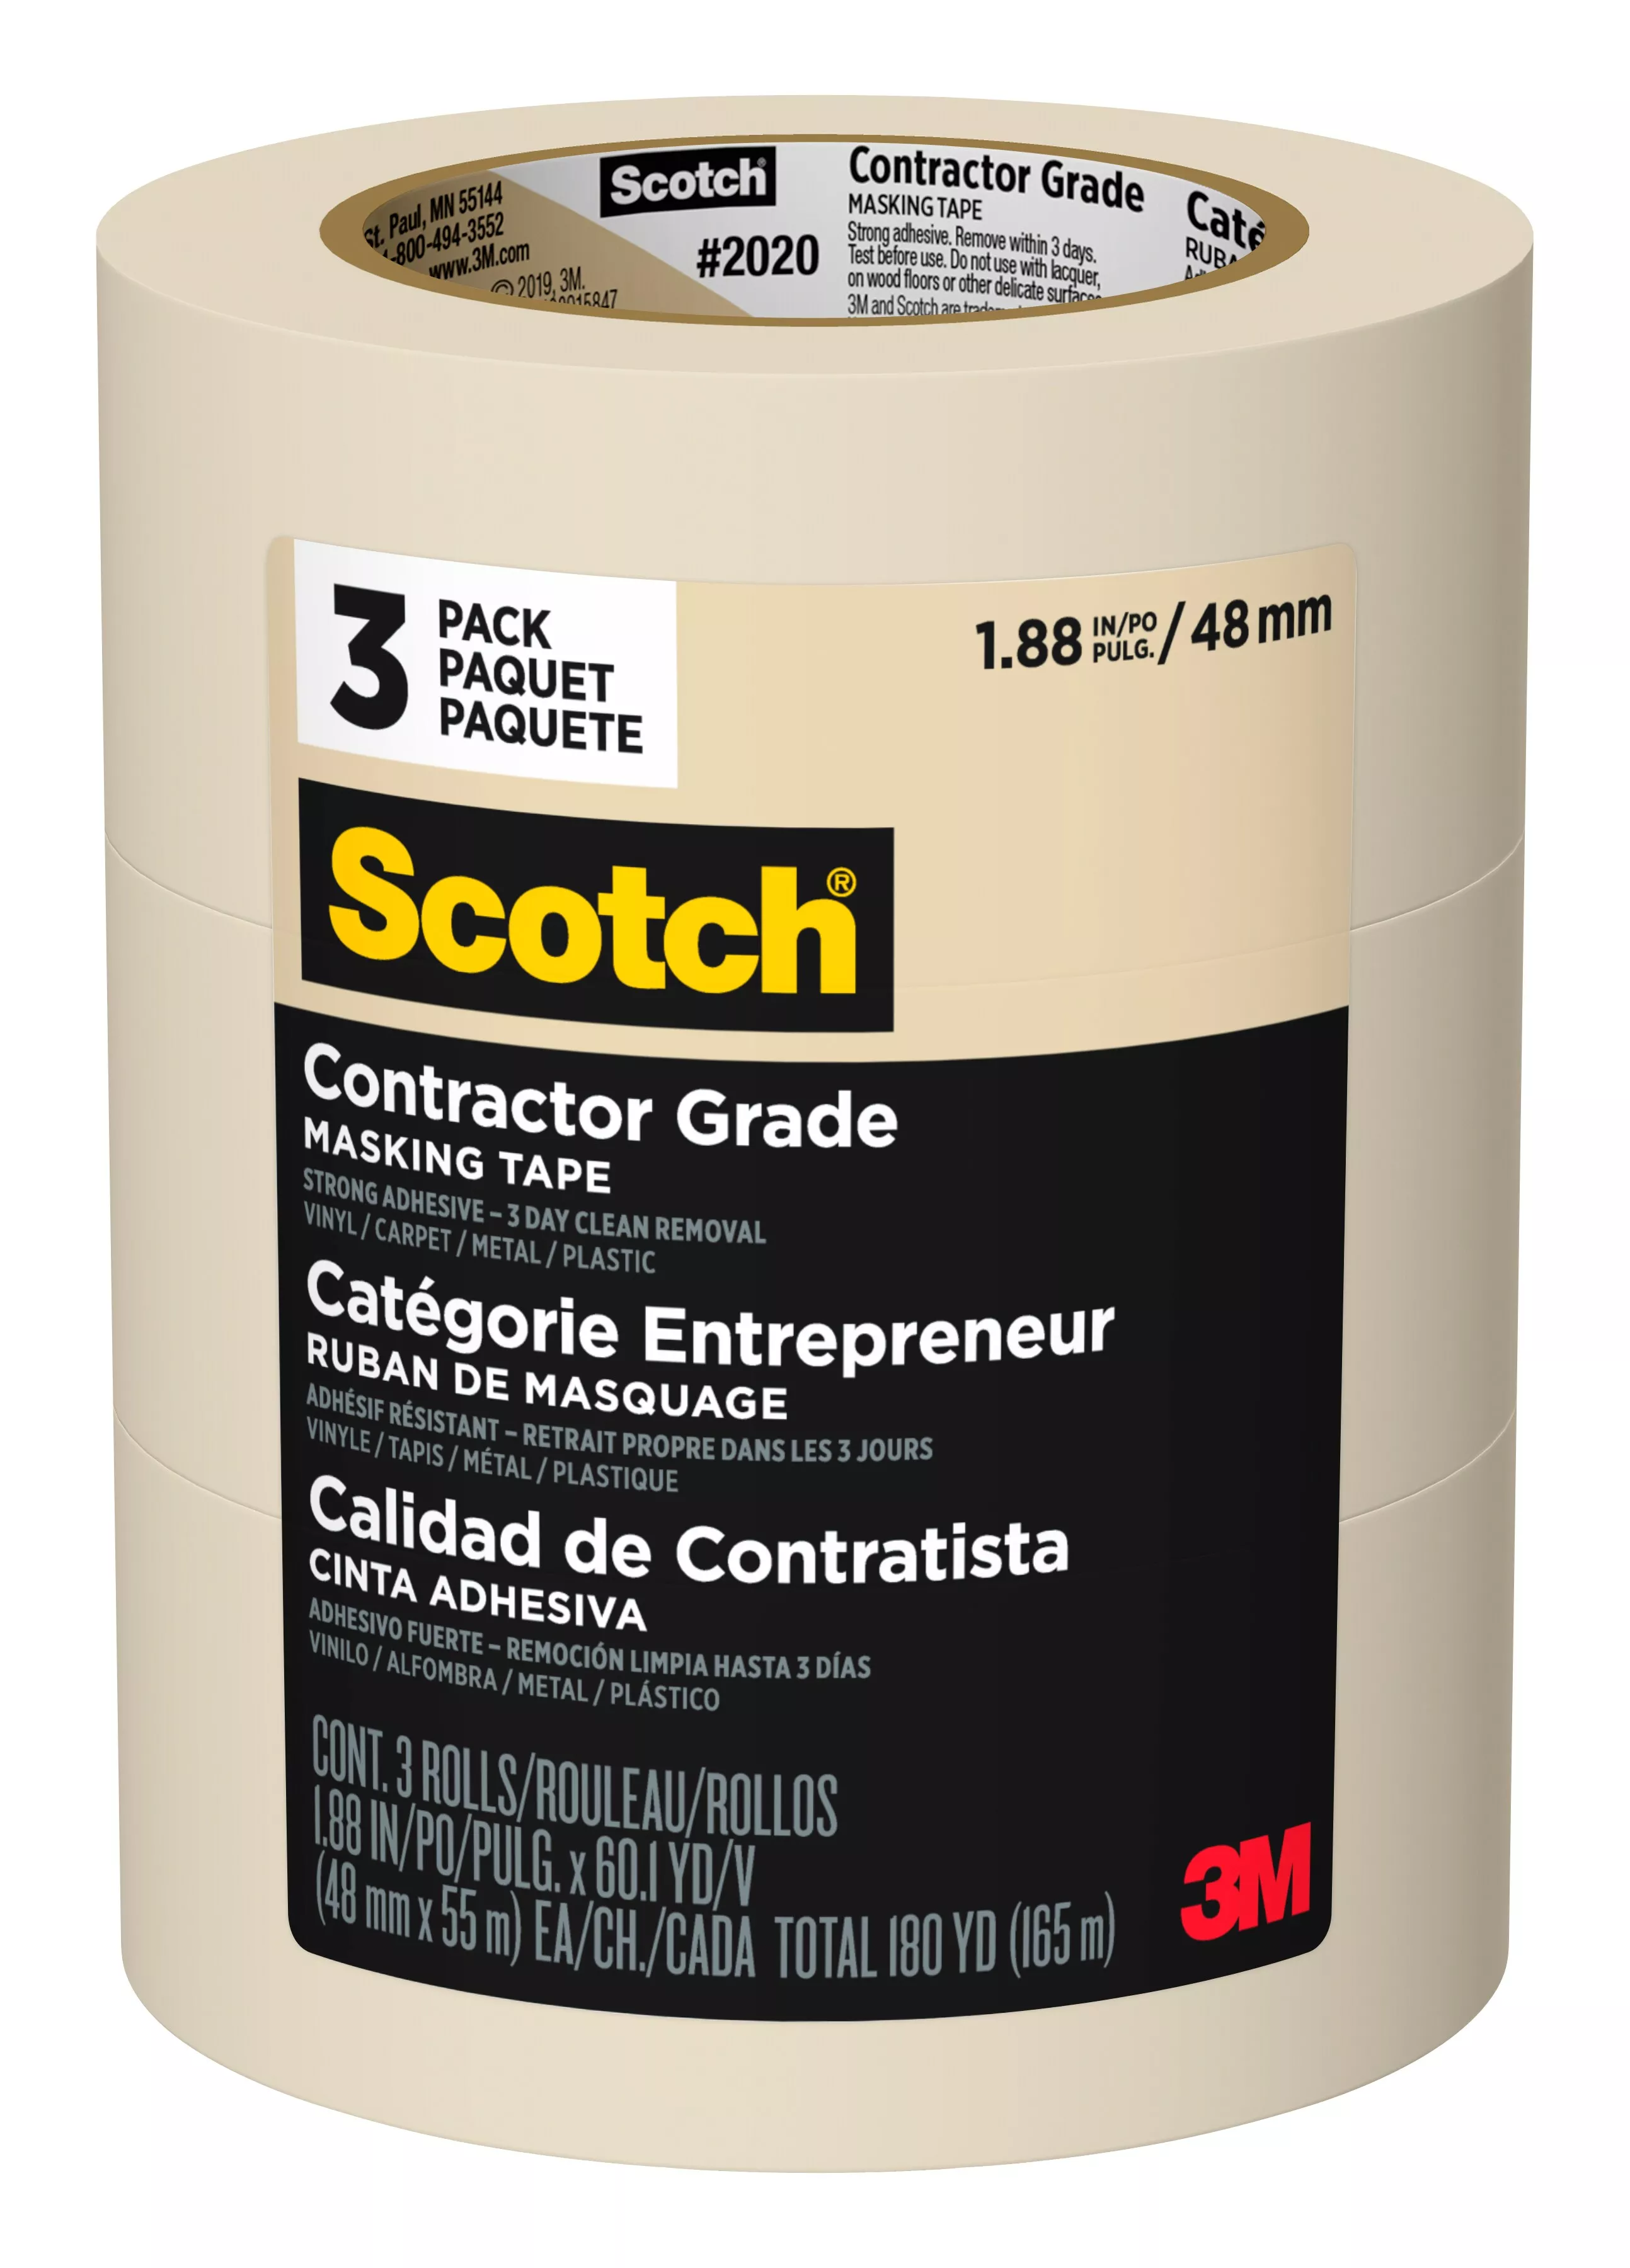 Scotch® Contractor Grade Masking Tape 2020-48EP3, 1.88 in x 60.1 yd
(48mm x 55m), 3 rolls/pack